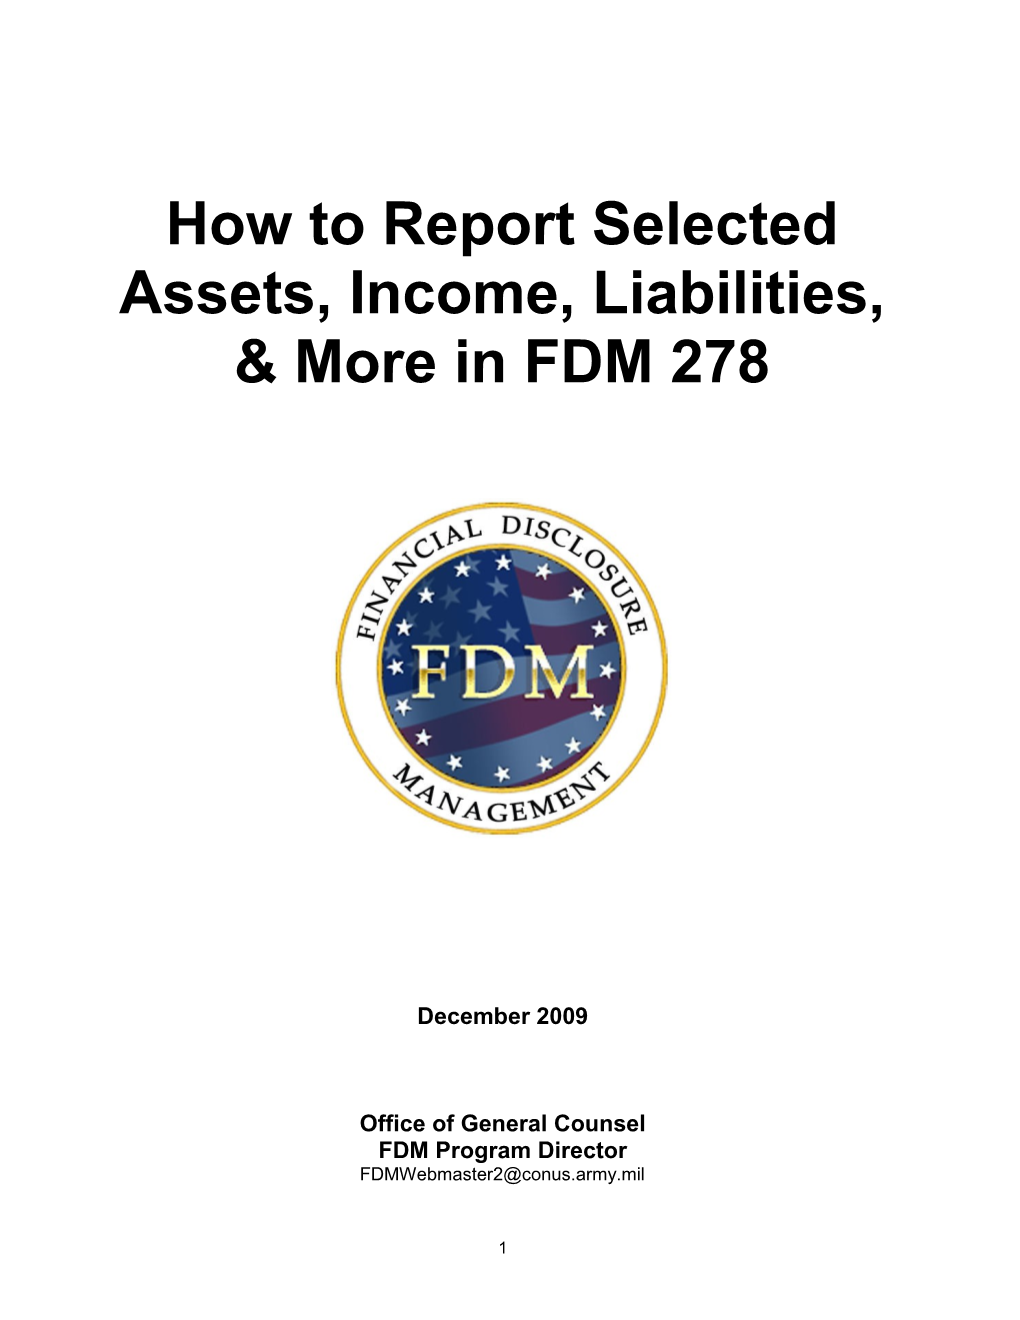 How to Report Selected Assets, Income, Liabilities, & More in FDM 278